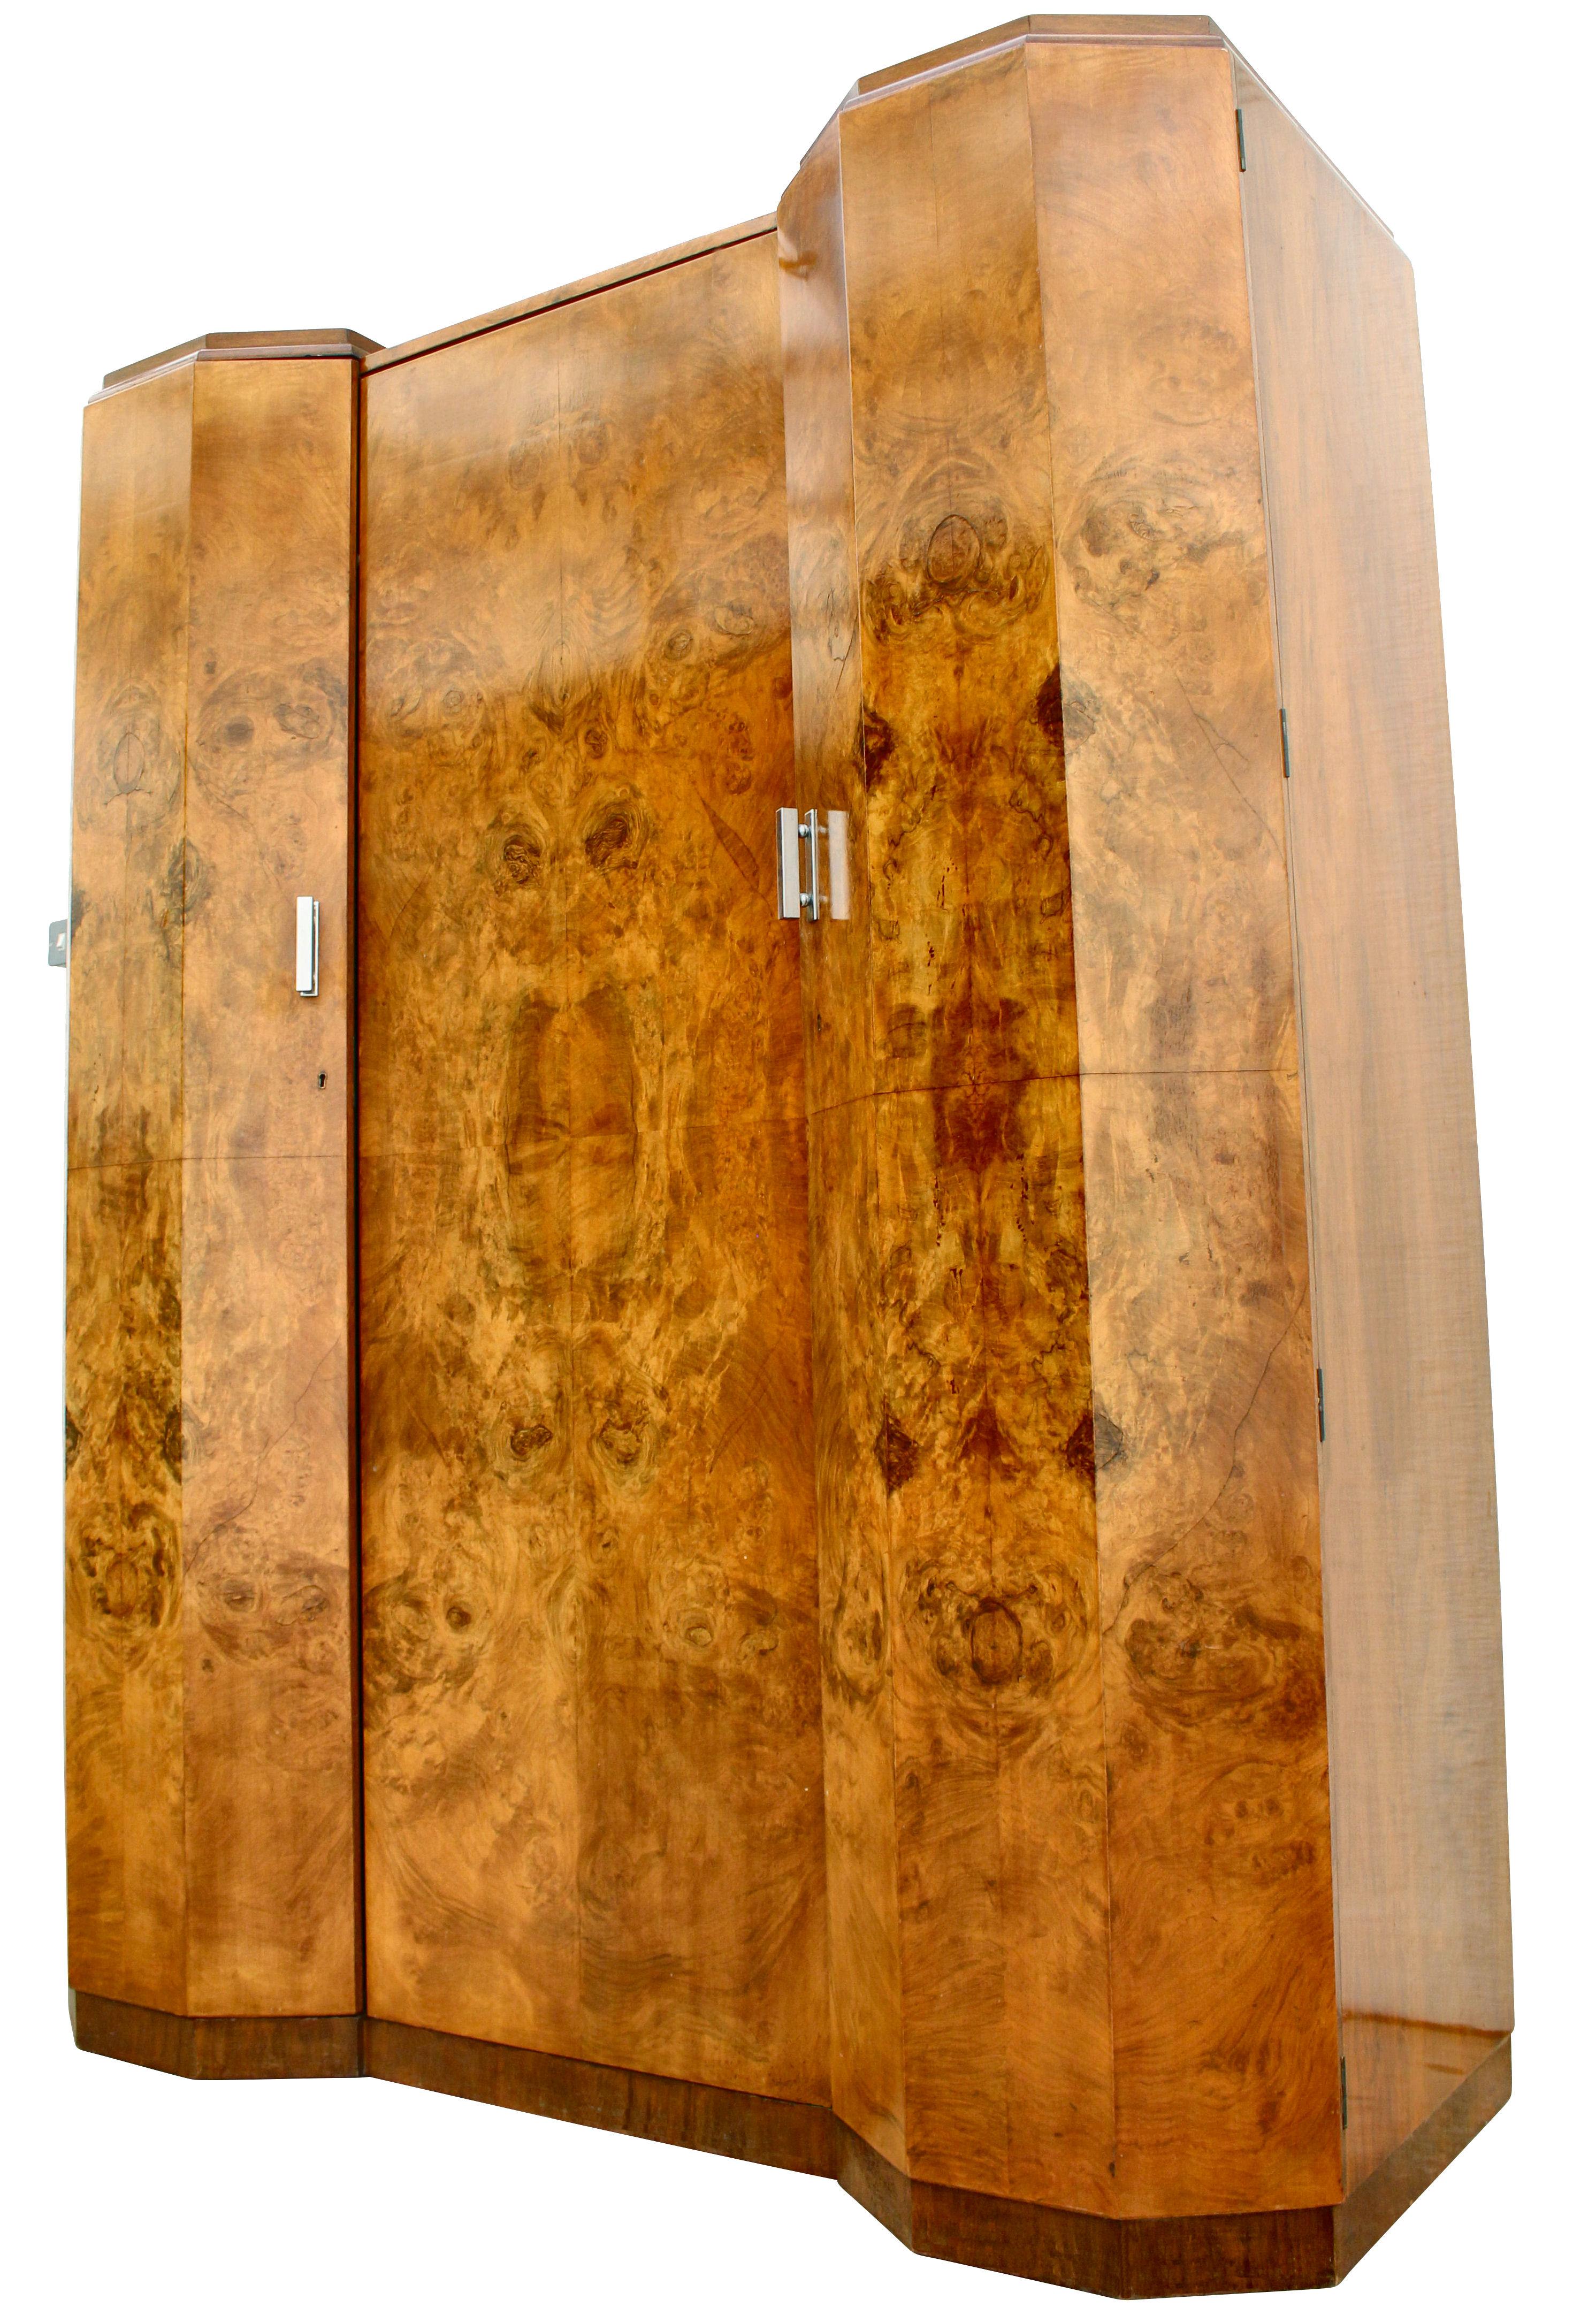 We hope the images offered go some way to demonstrate how truly wonderful this Art Deco gem is. For your consideration is this fabulously shaped triple wardrobe in heavily figured walnut veneer. This inverted breakfront has two hex shaped doors with